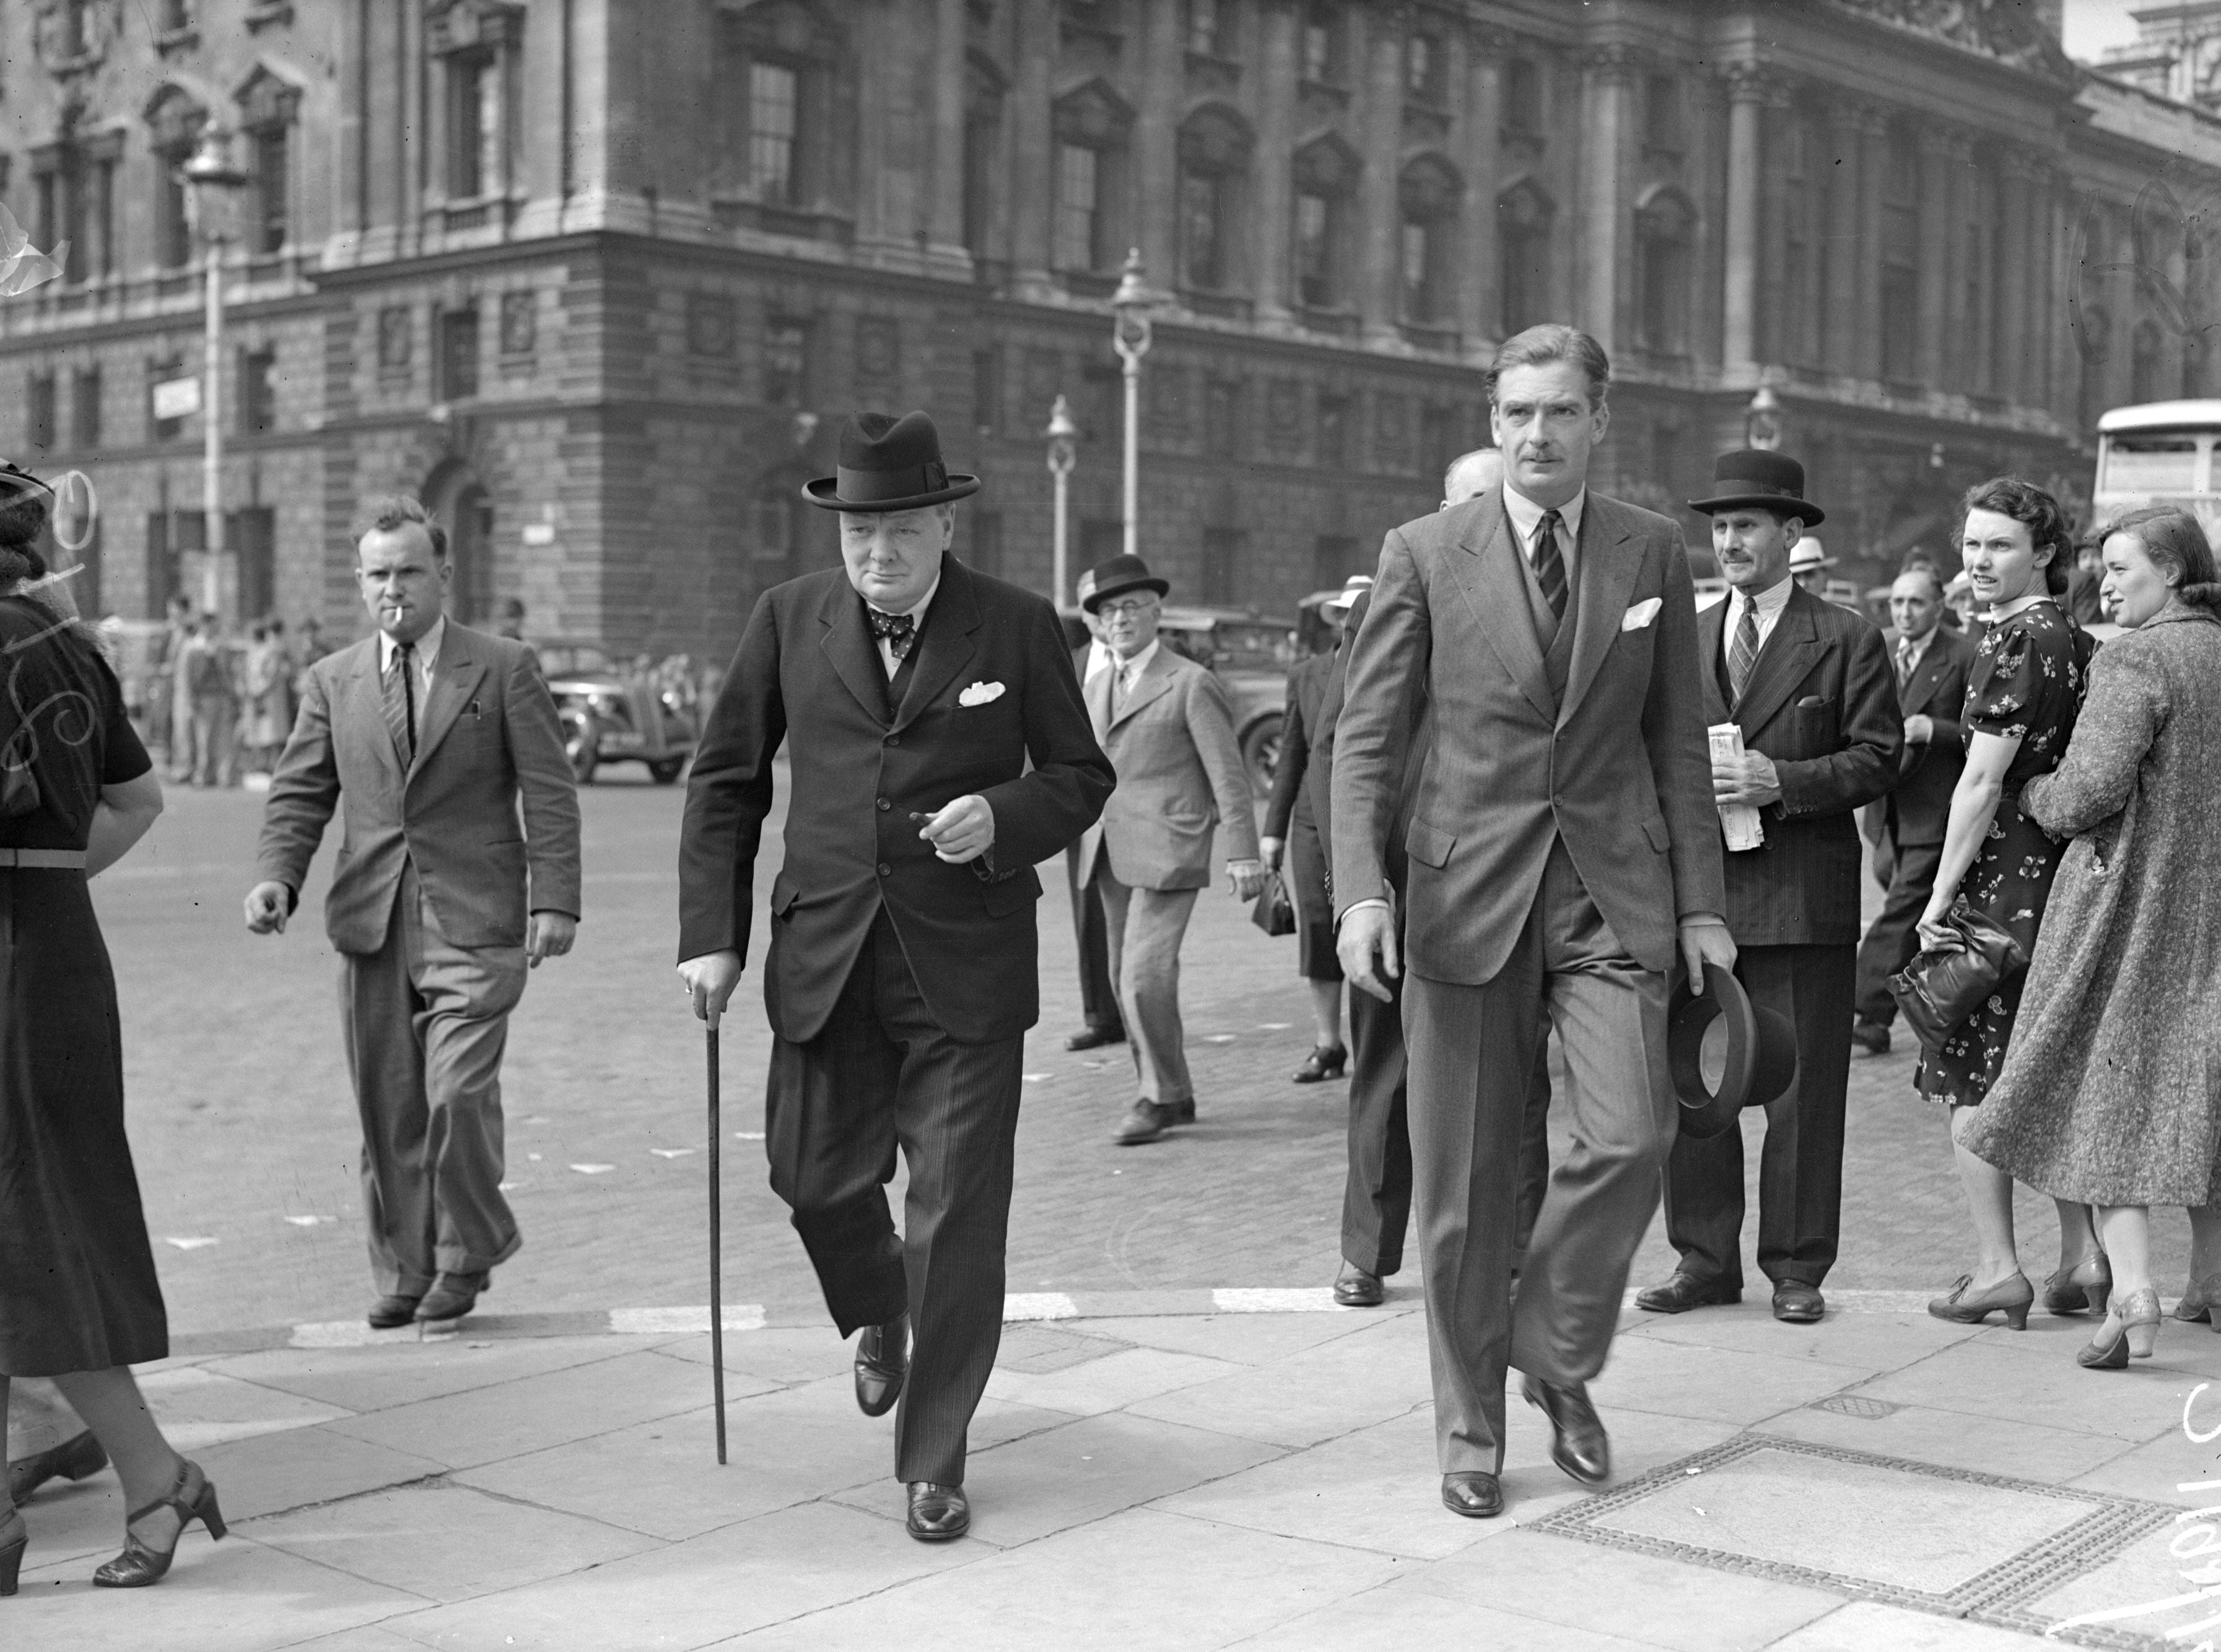 Eden and Churchill on their way to parliament during the war crisis